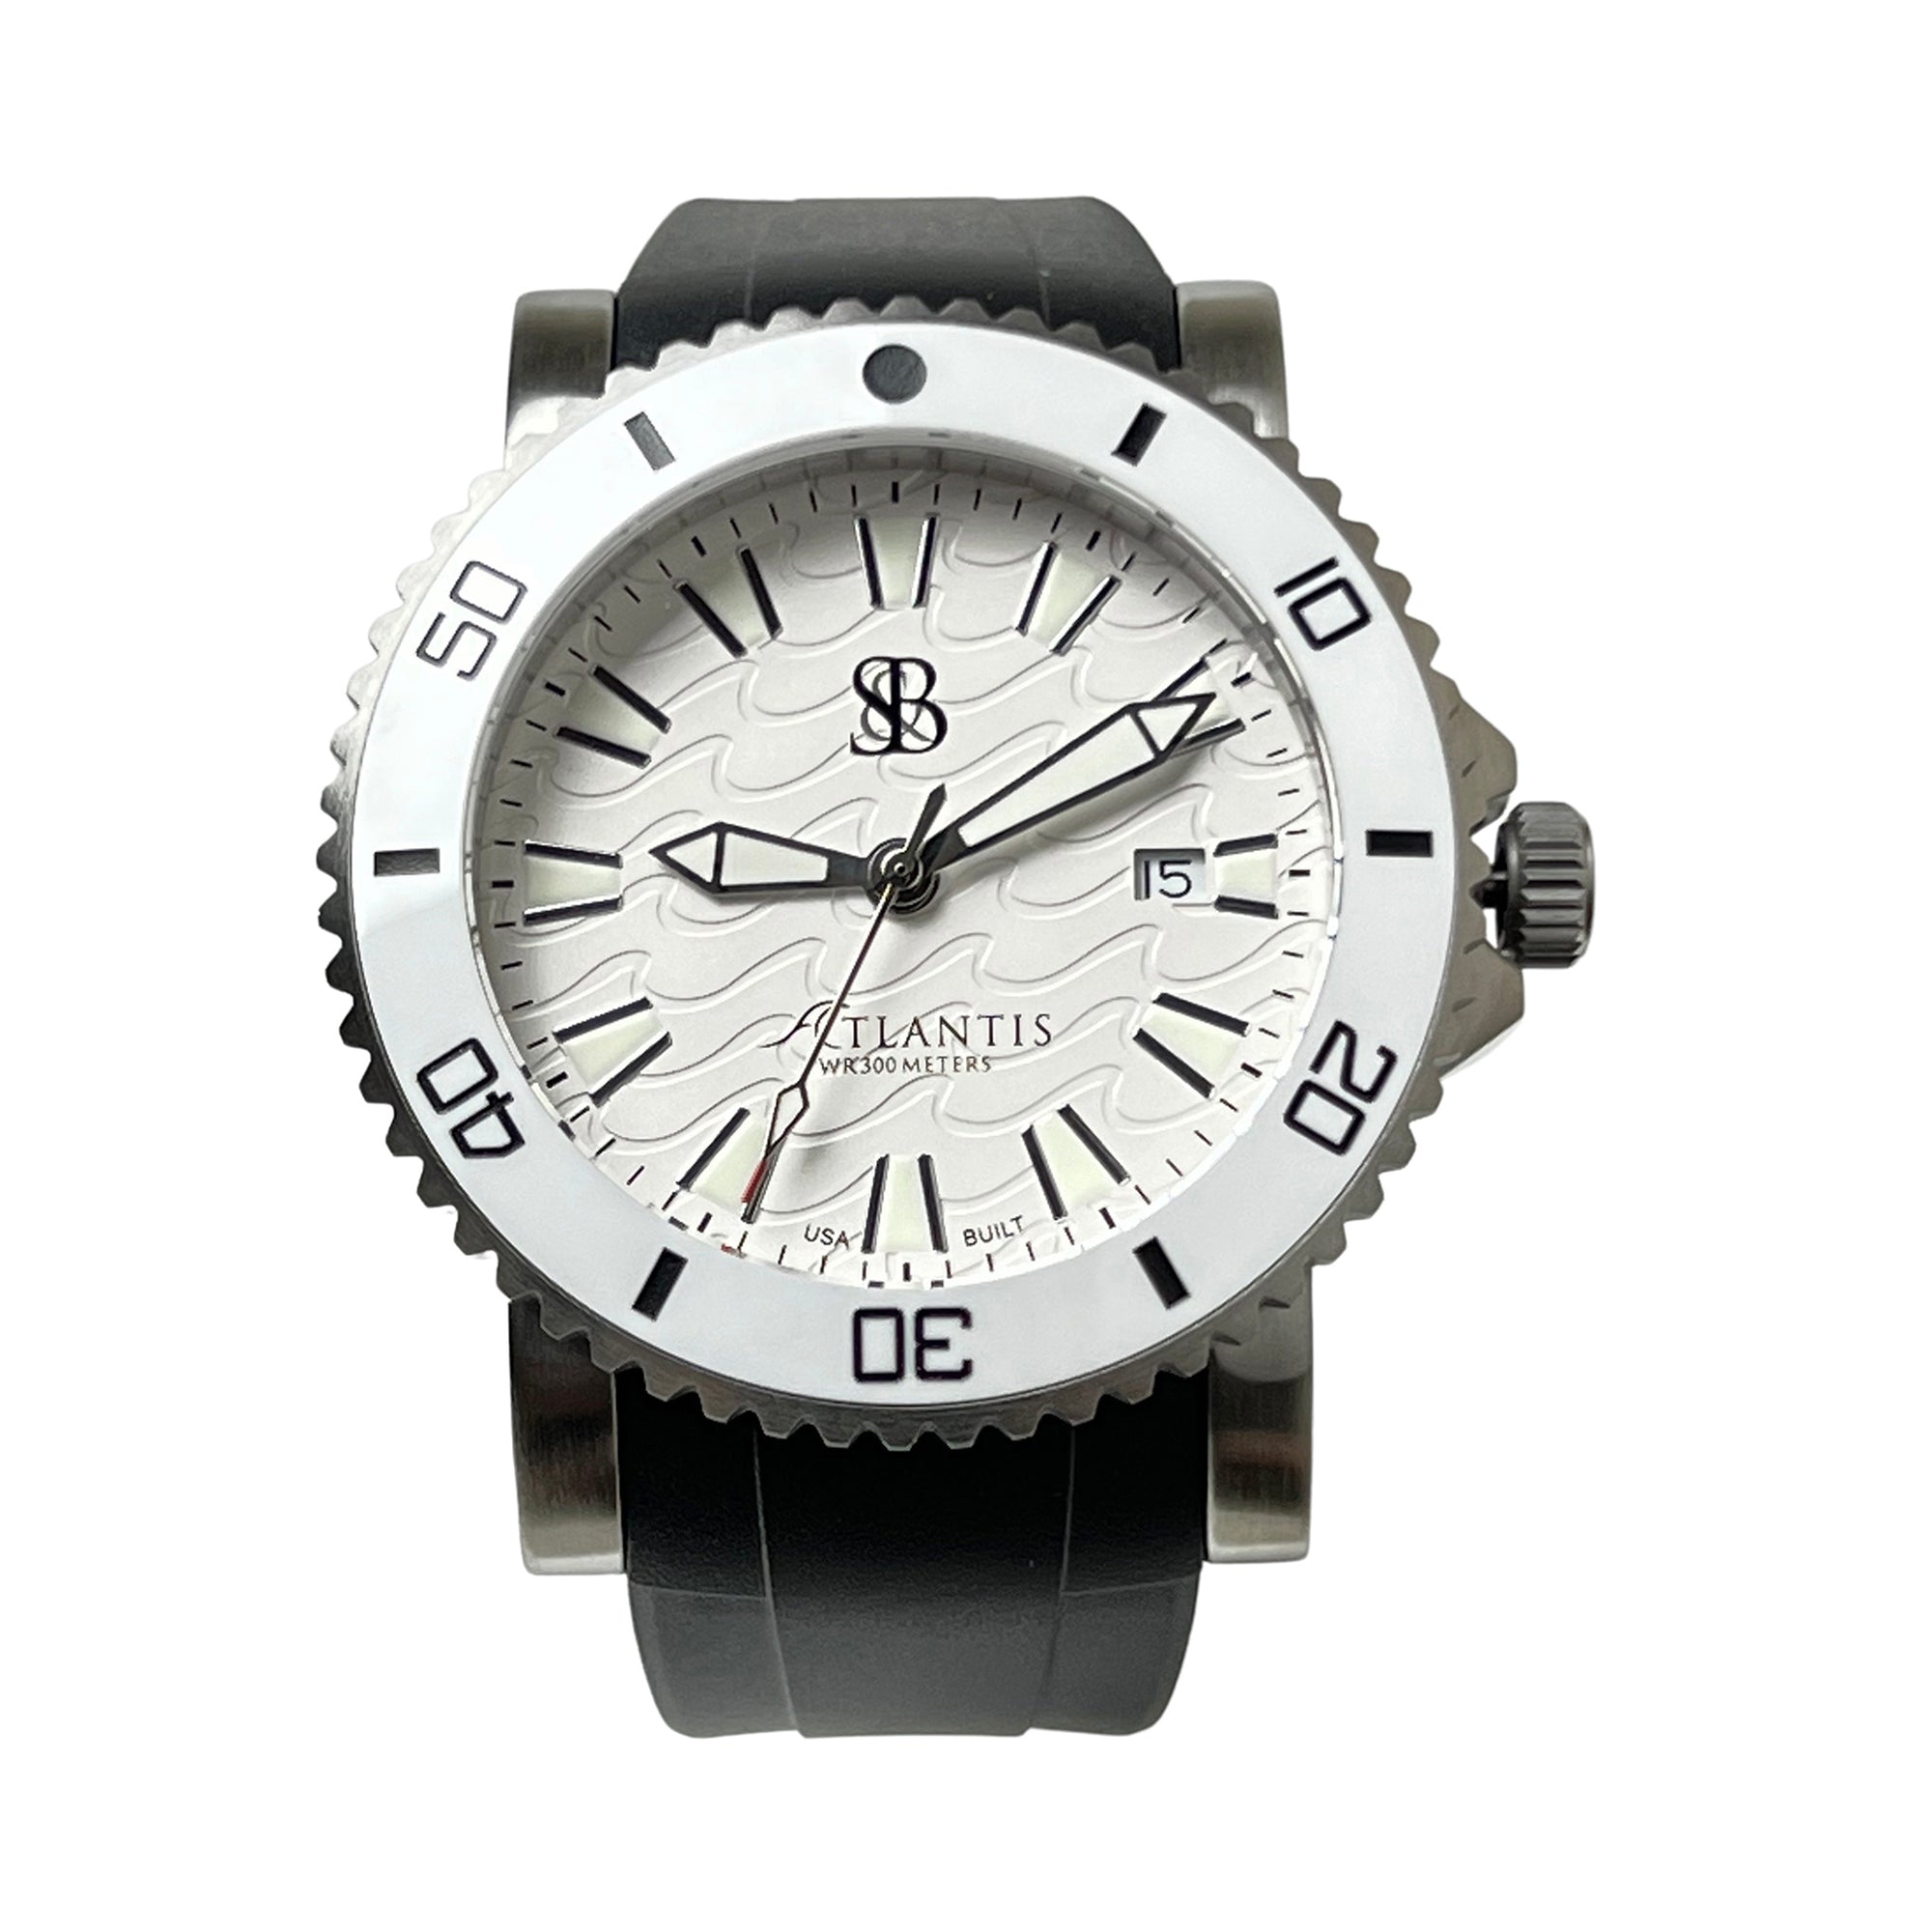 Black and White Men's Dive Watch